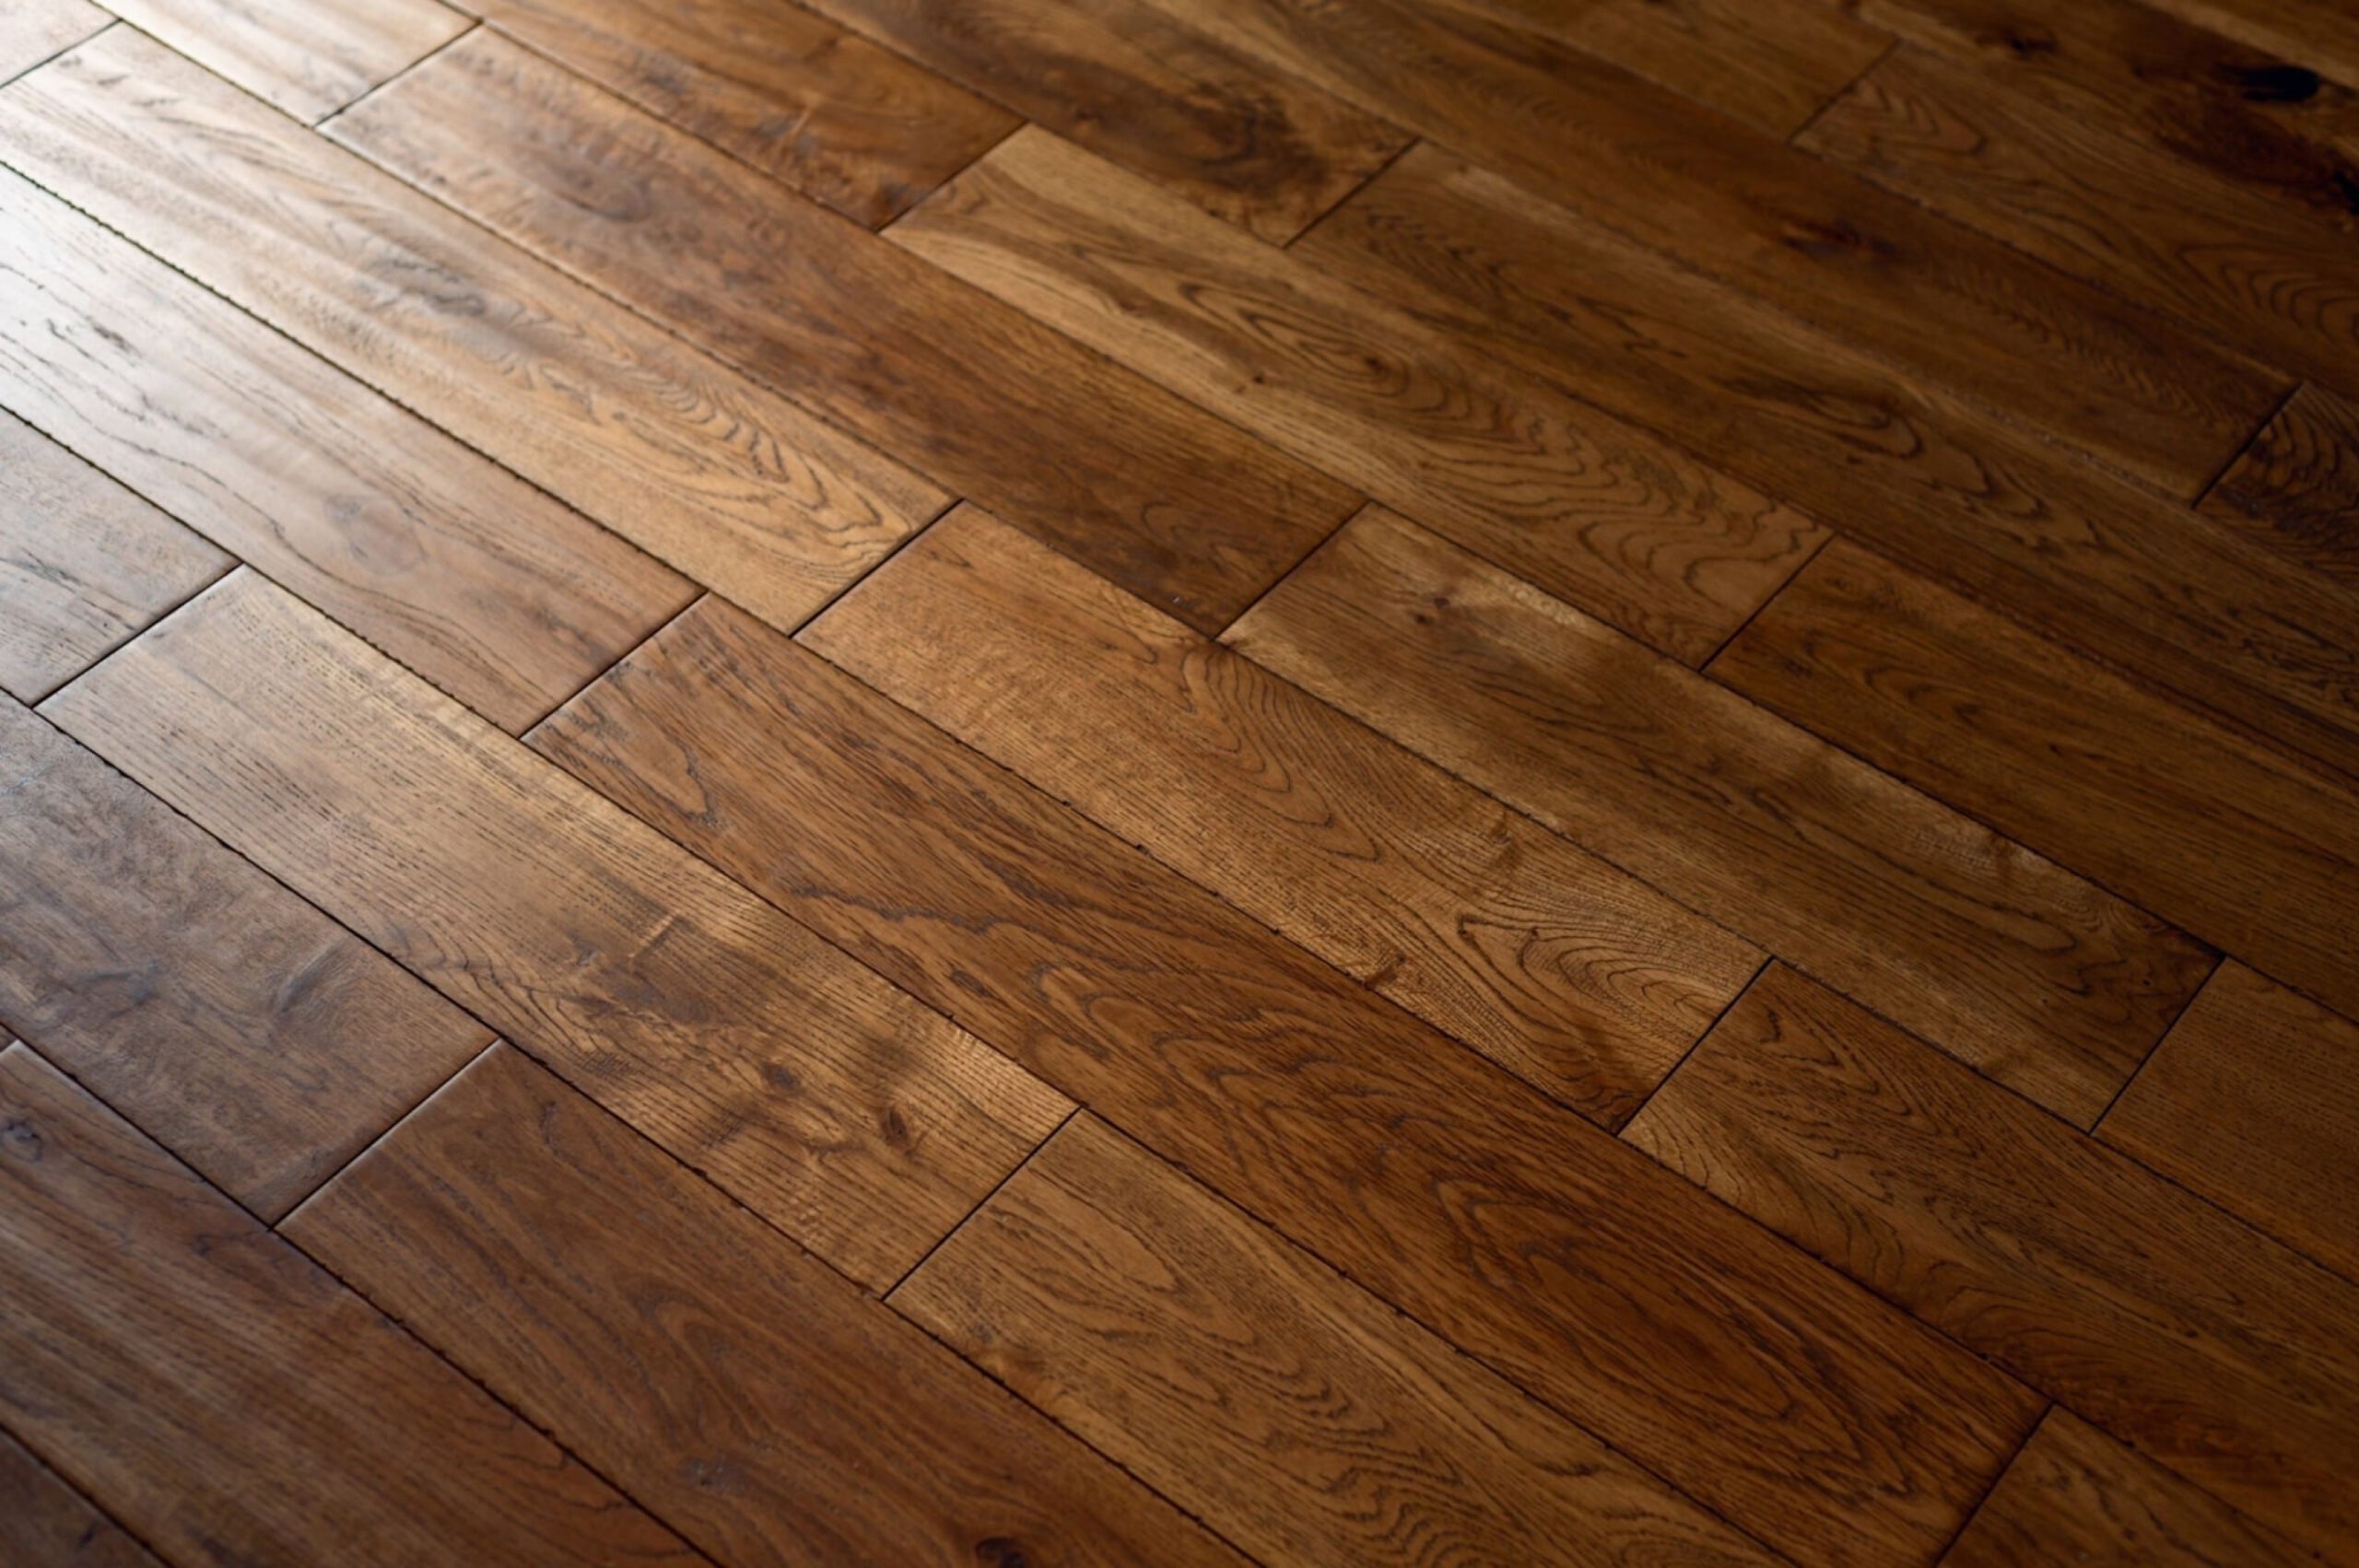 Debunking the 5 Most Common Myths About Hardwood Flooring